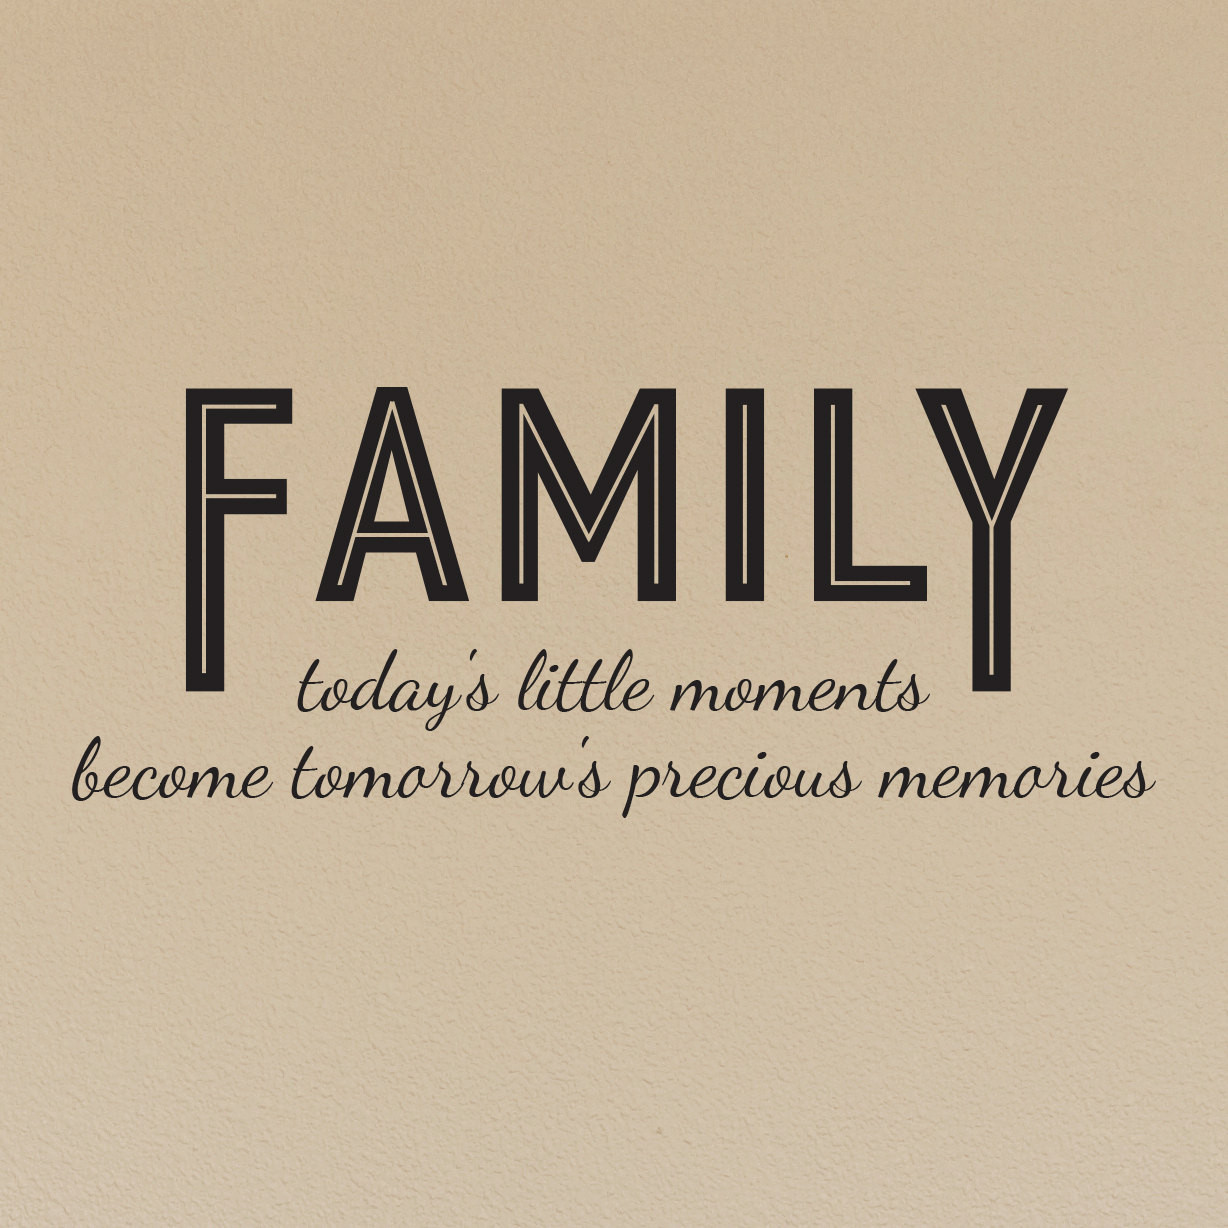 Little Family Quotes
 Family today s little moments Quote Wall Decal by danadecals